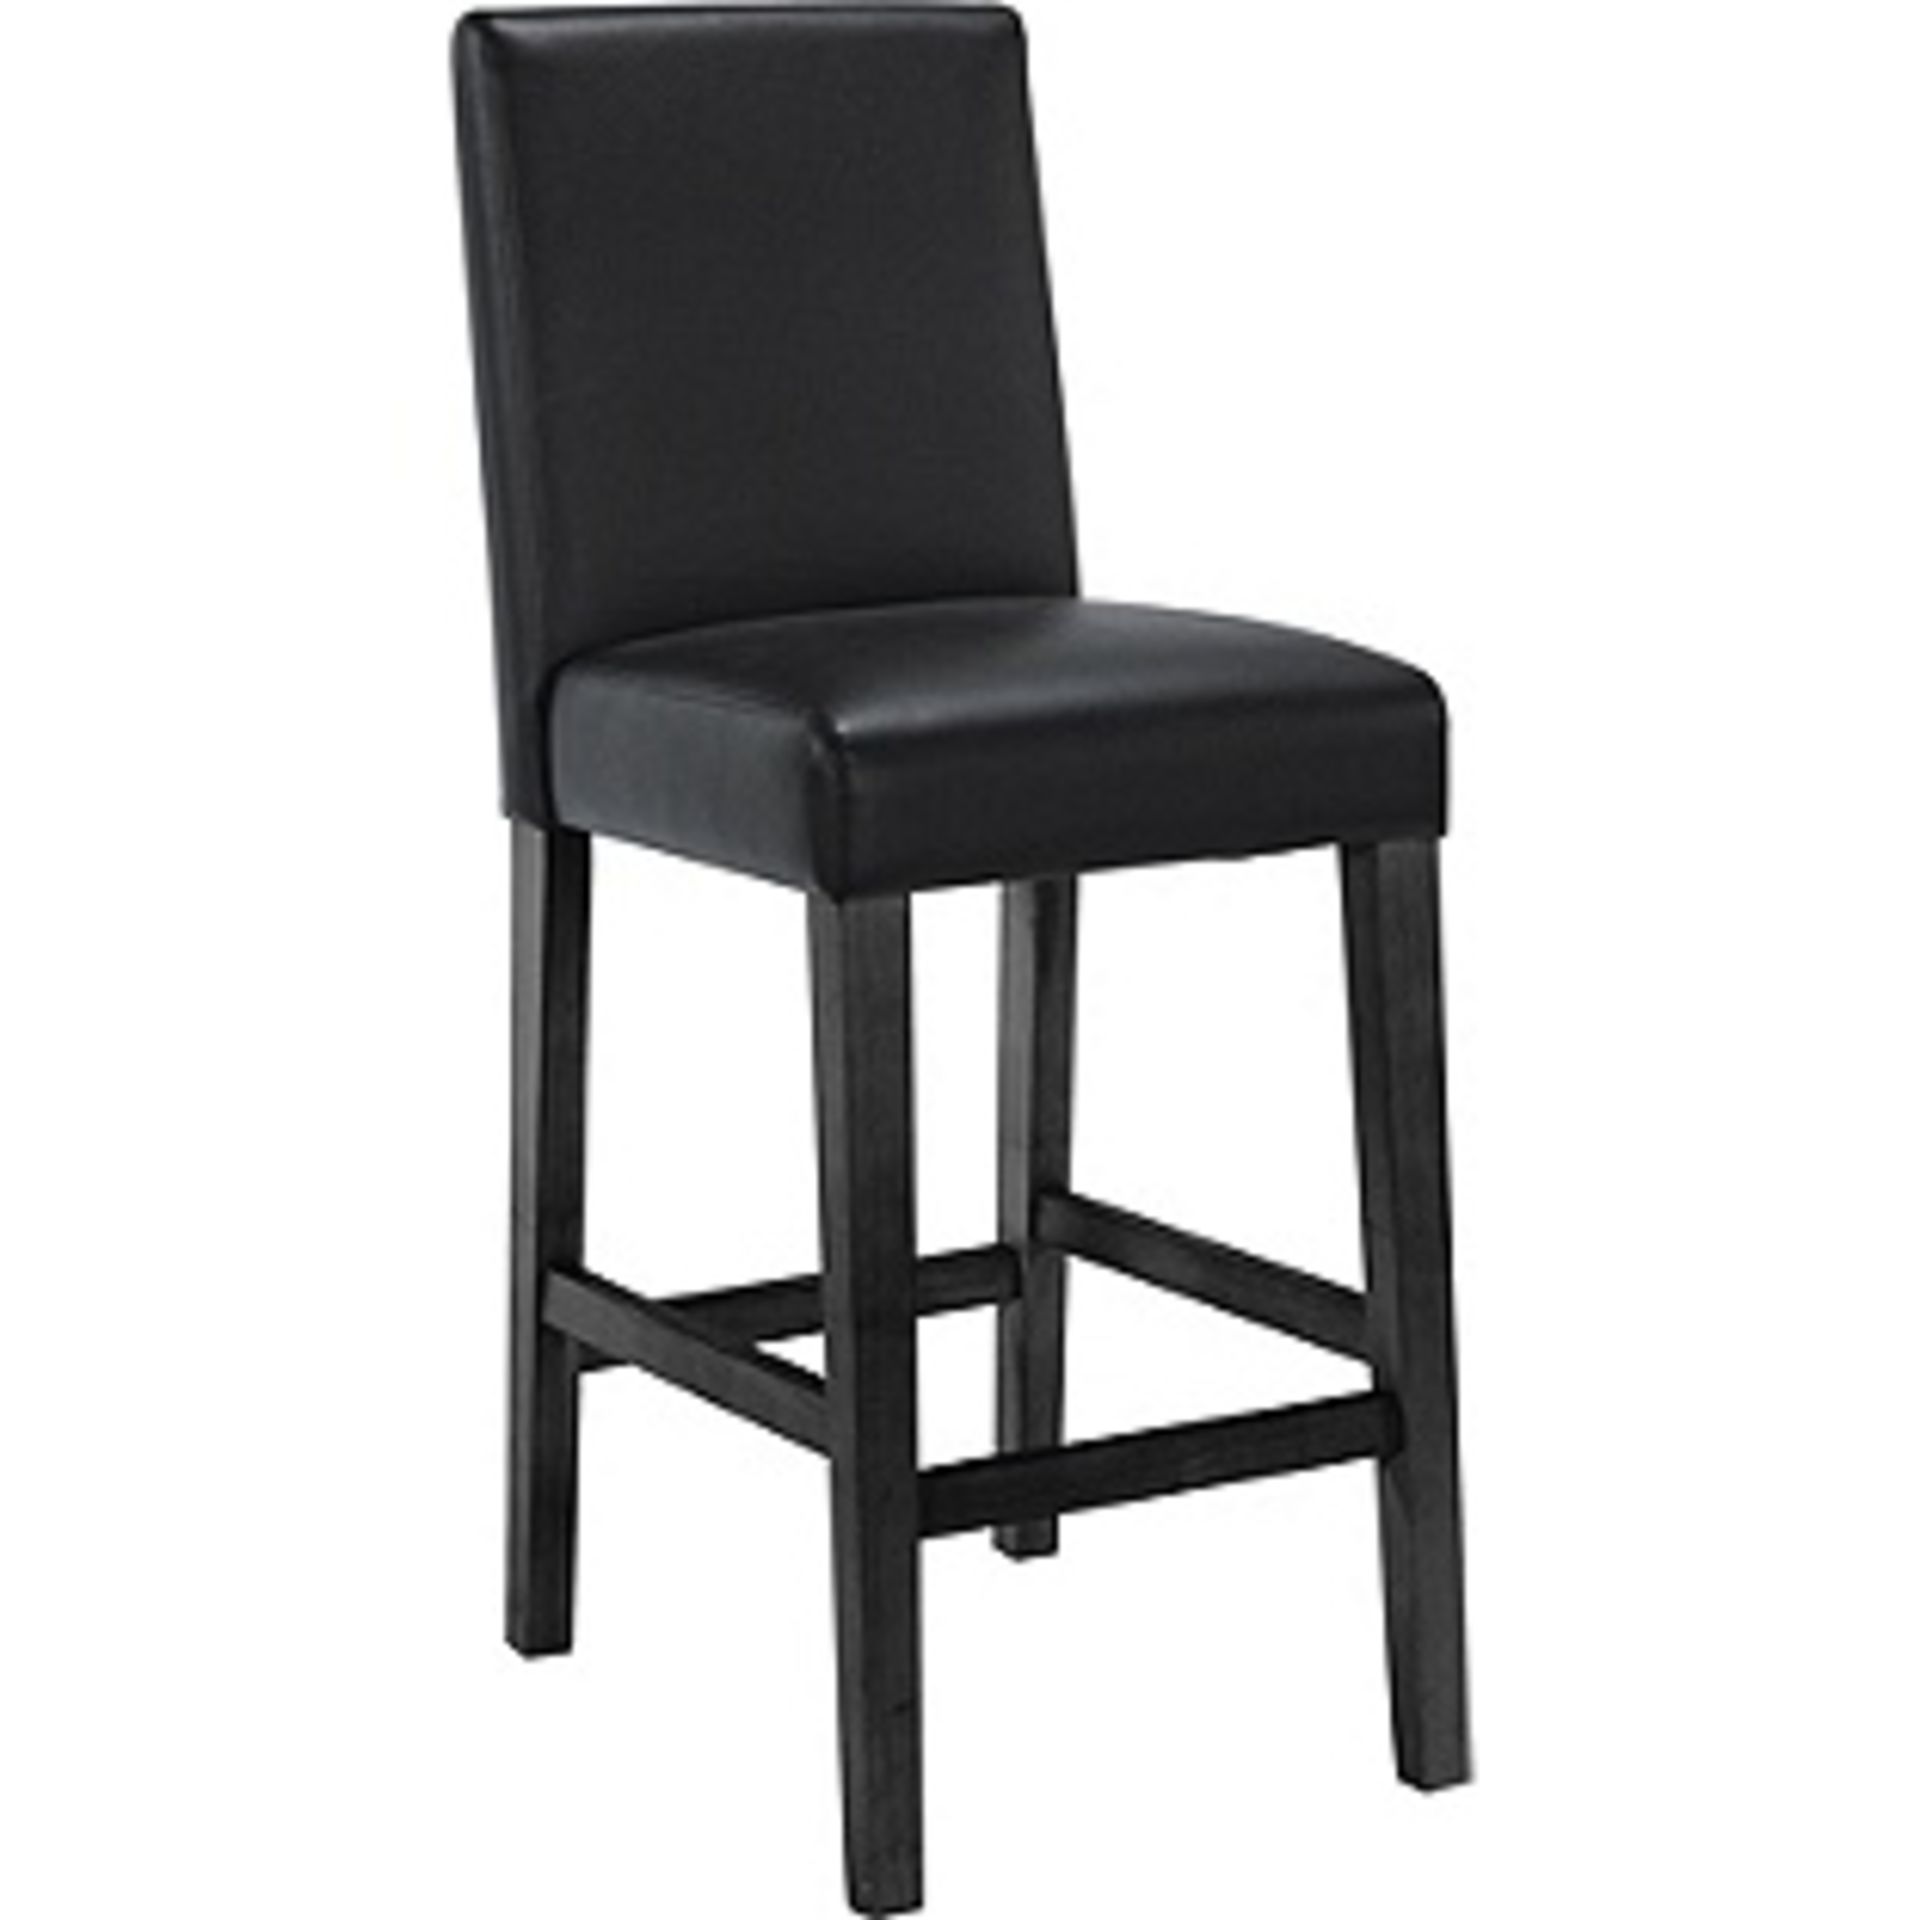 Winslow Black Leather Effect Bar Stool. Size H100, W41, D50cm. Boxed & Unchecked. Please Note